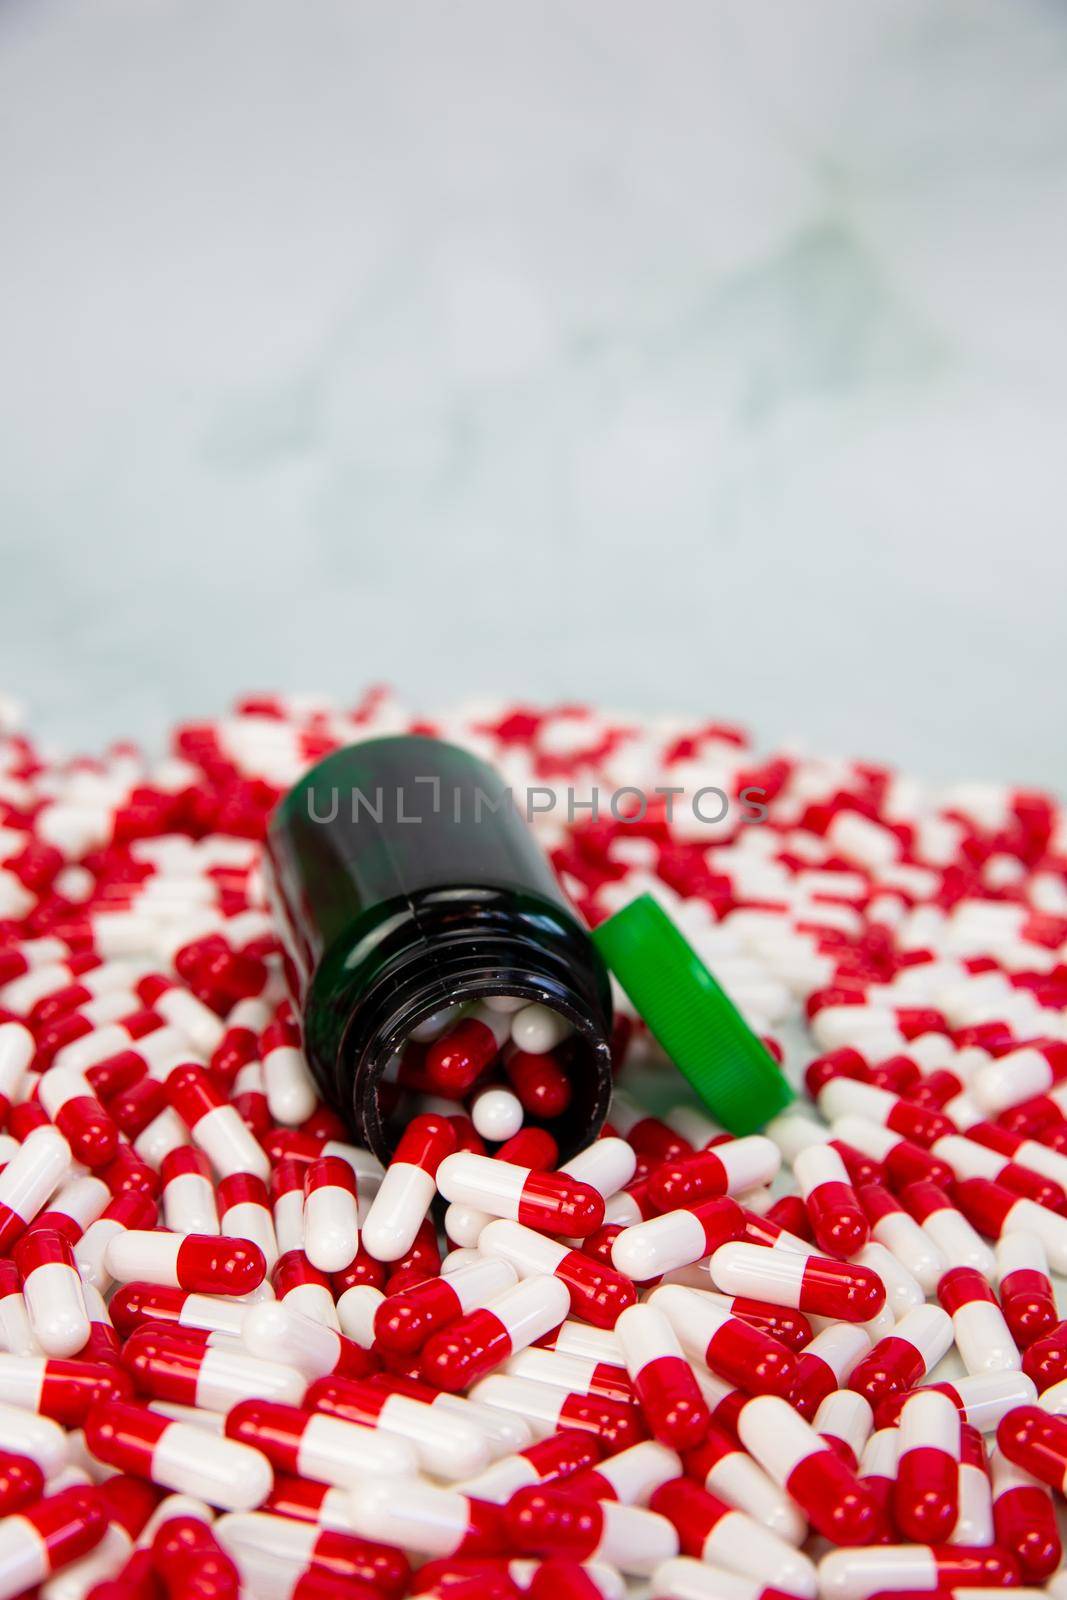 Bottle with red and white capsule on white background, Vitamin,drugs or pharmaceutical medication background, Health, medical and business concept by Annebel146